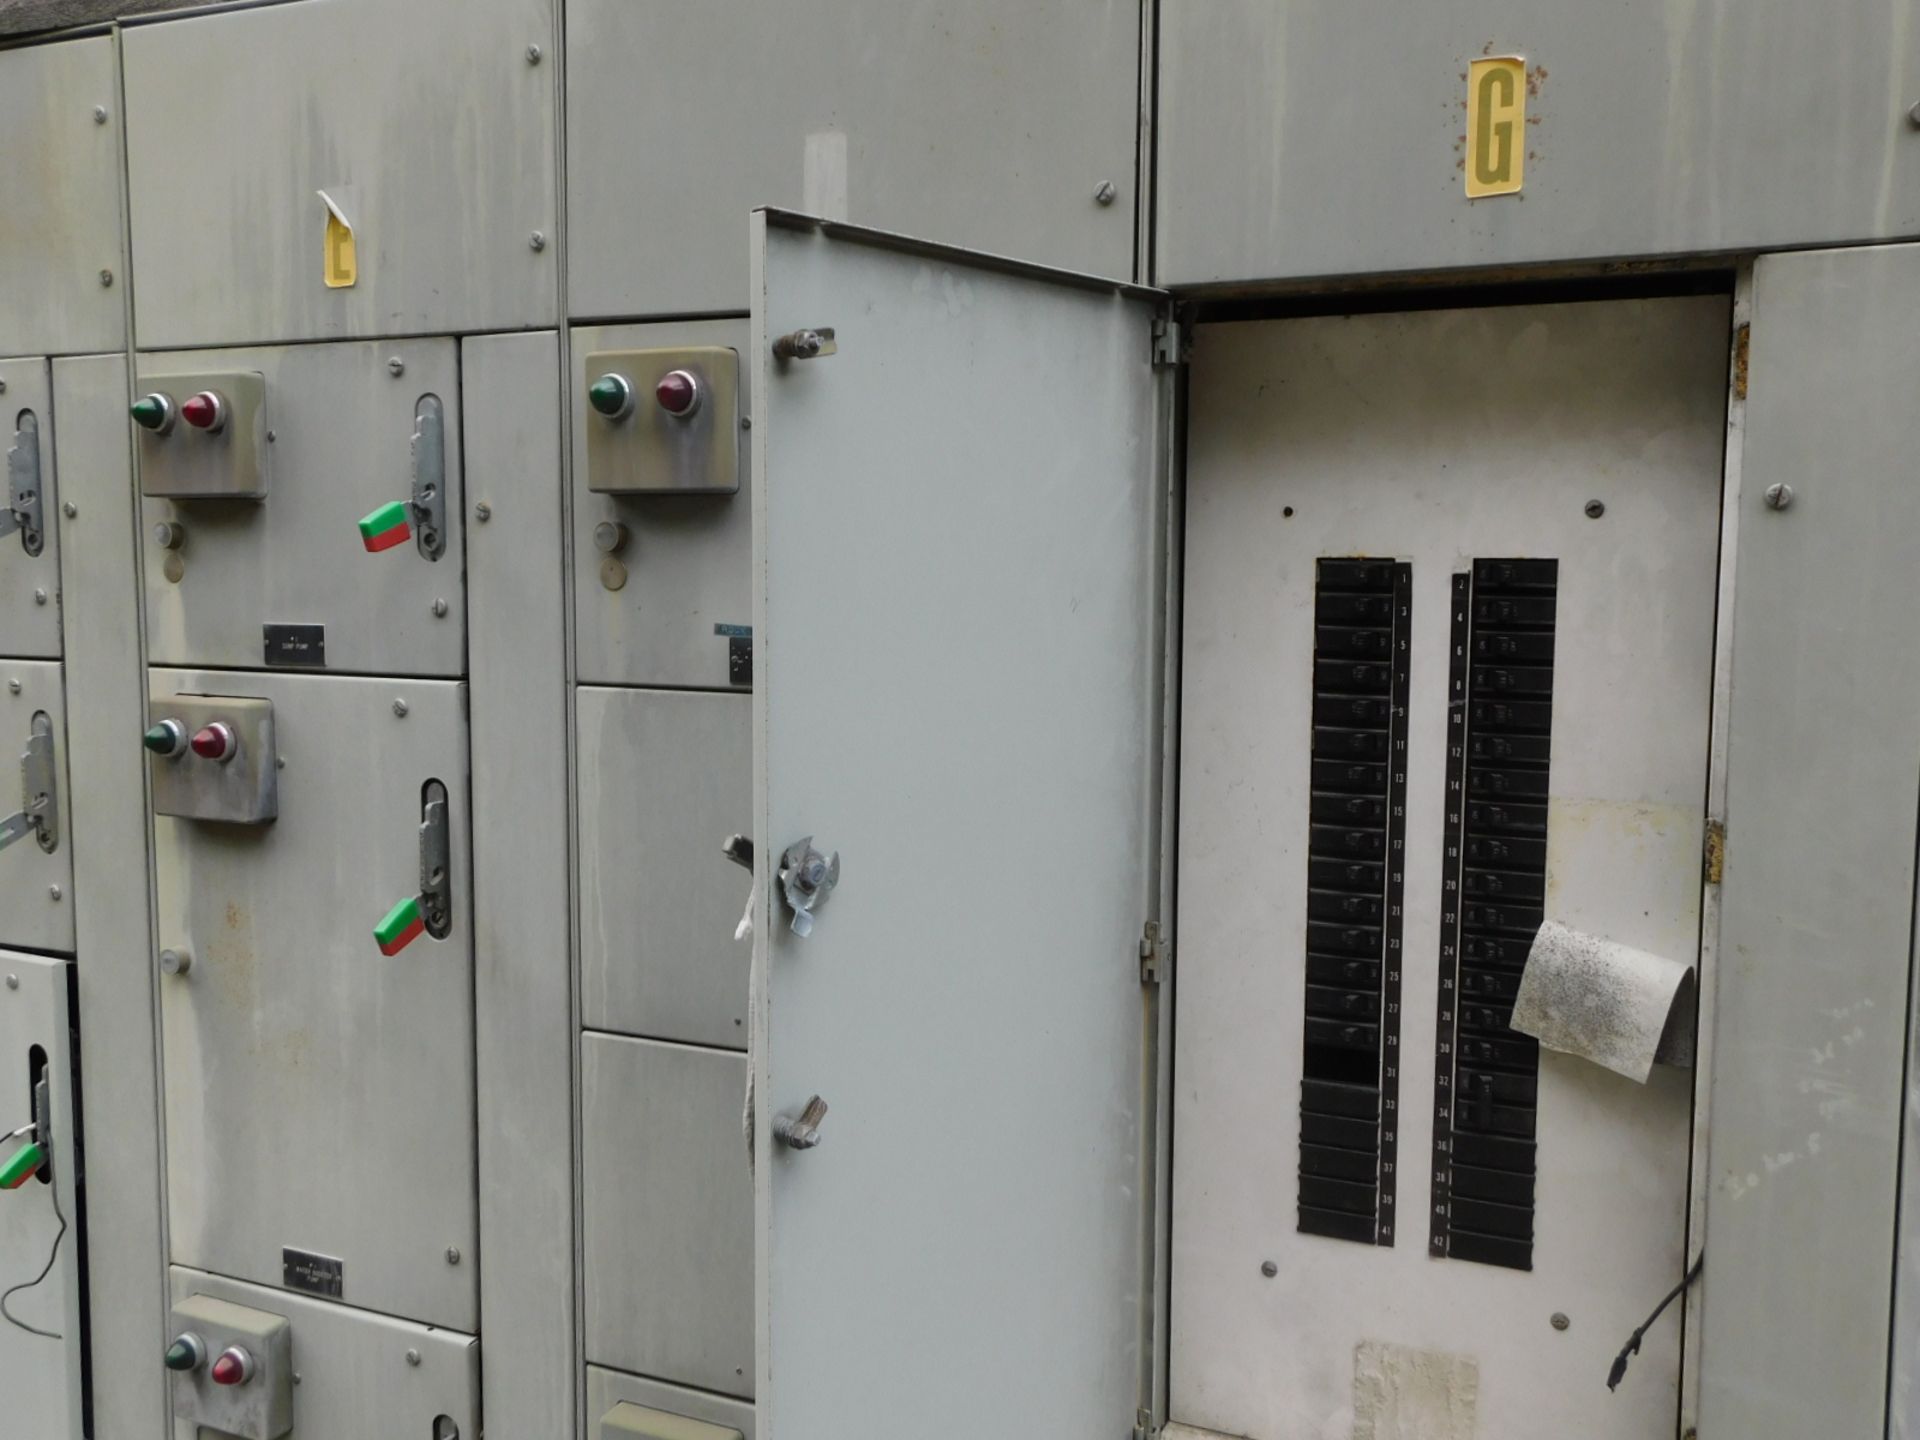 GE 4 SECTION MCC, CR2000, 1000AMP HOR., 300AMP VERT., (13) SWITCHES - Image 2 of 3